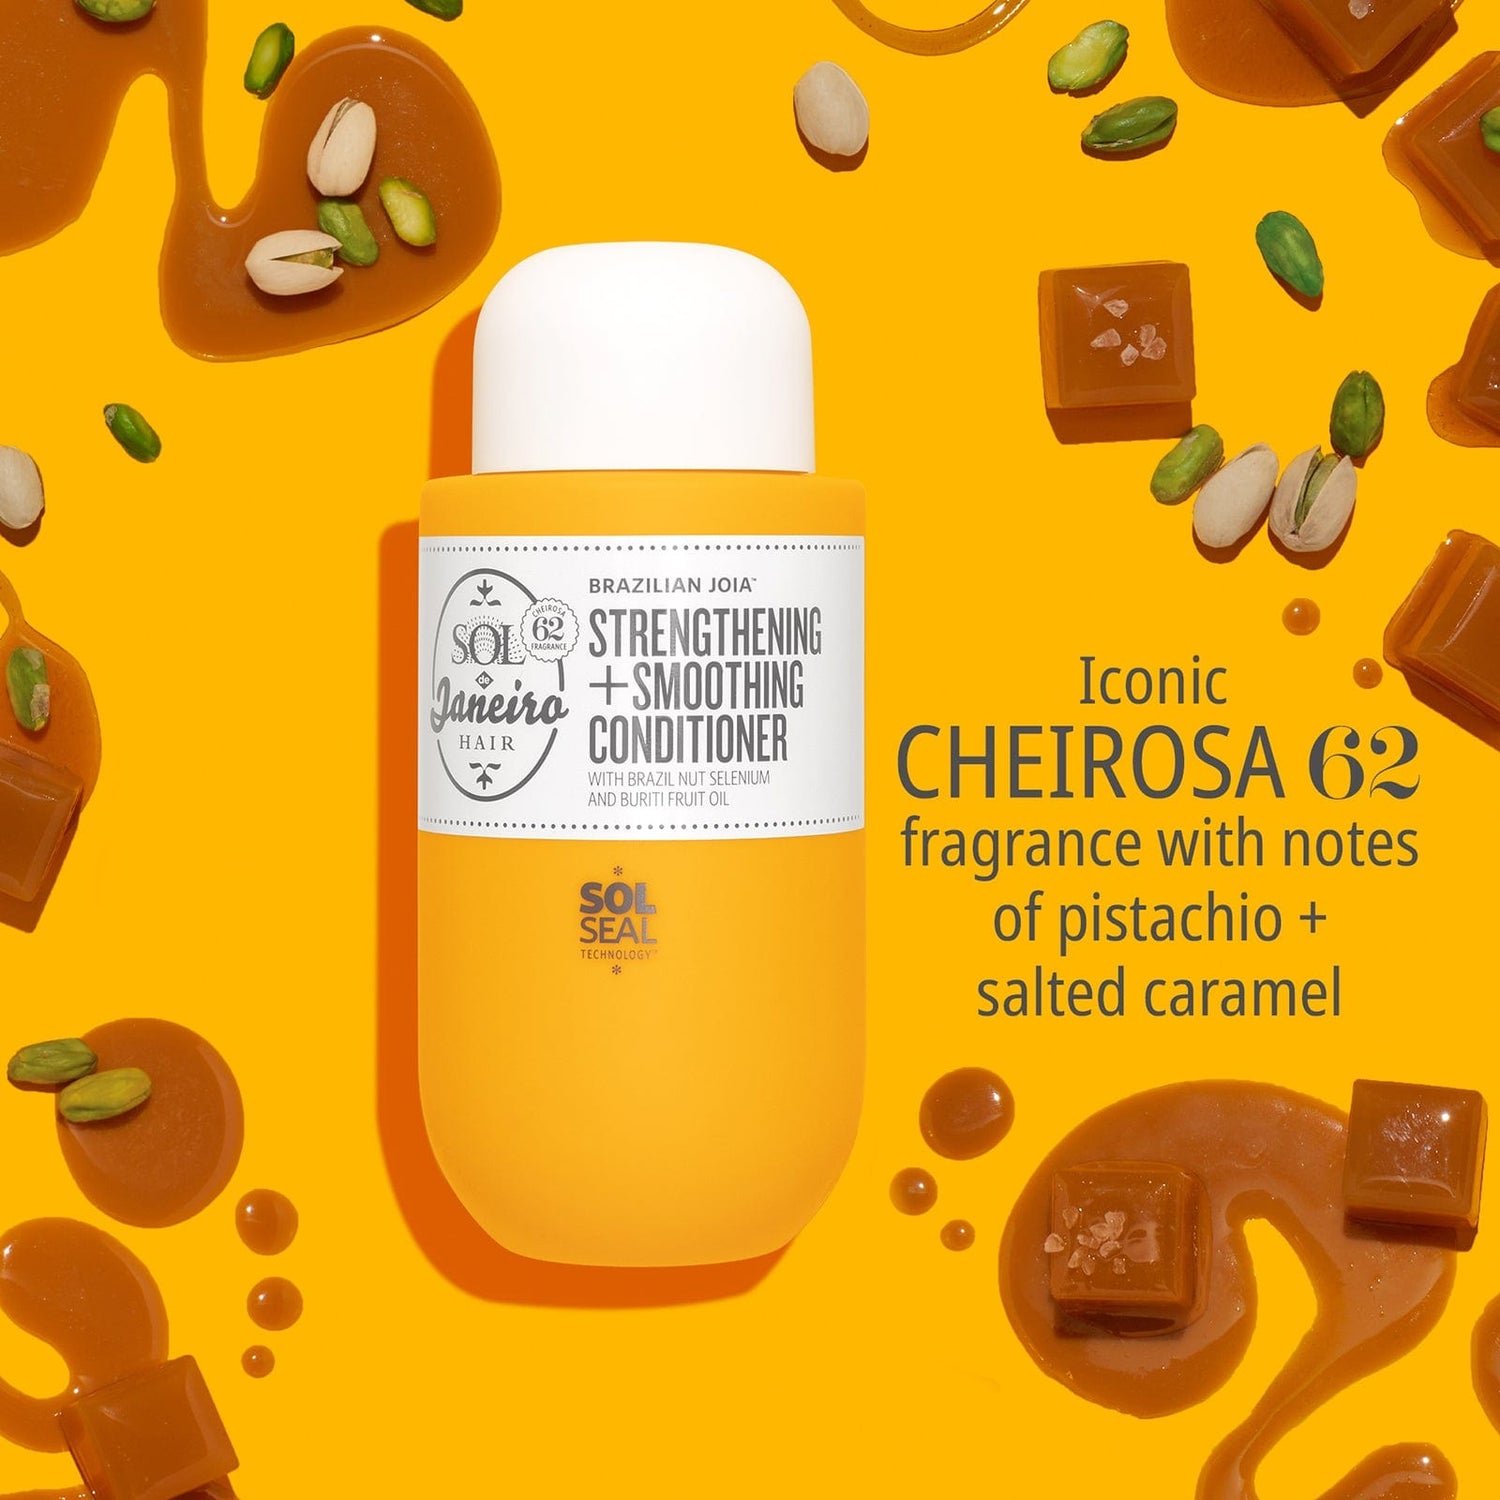 Iconic Cheirosa 61 fragrance with notes of pistachio and salted caramel